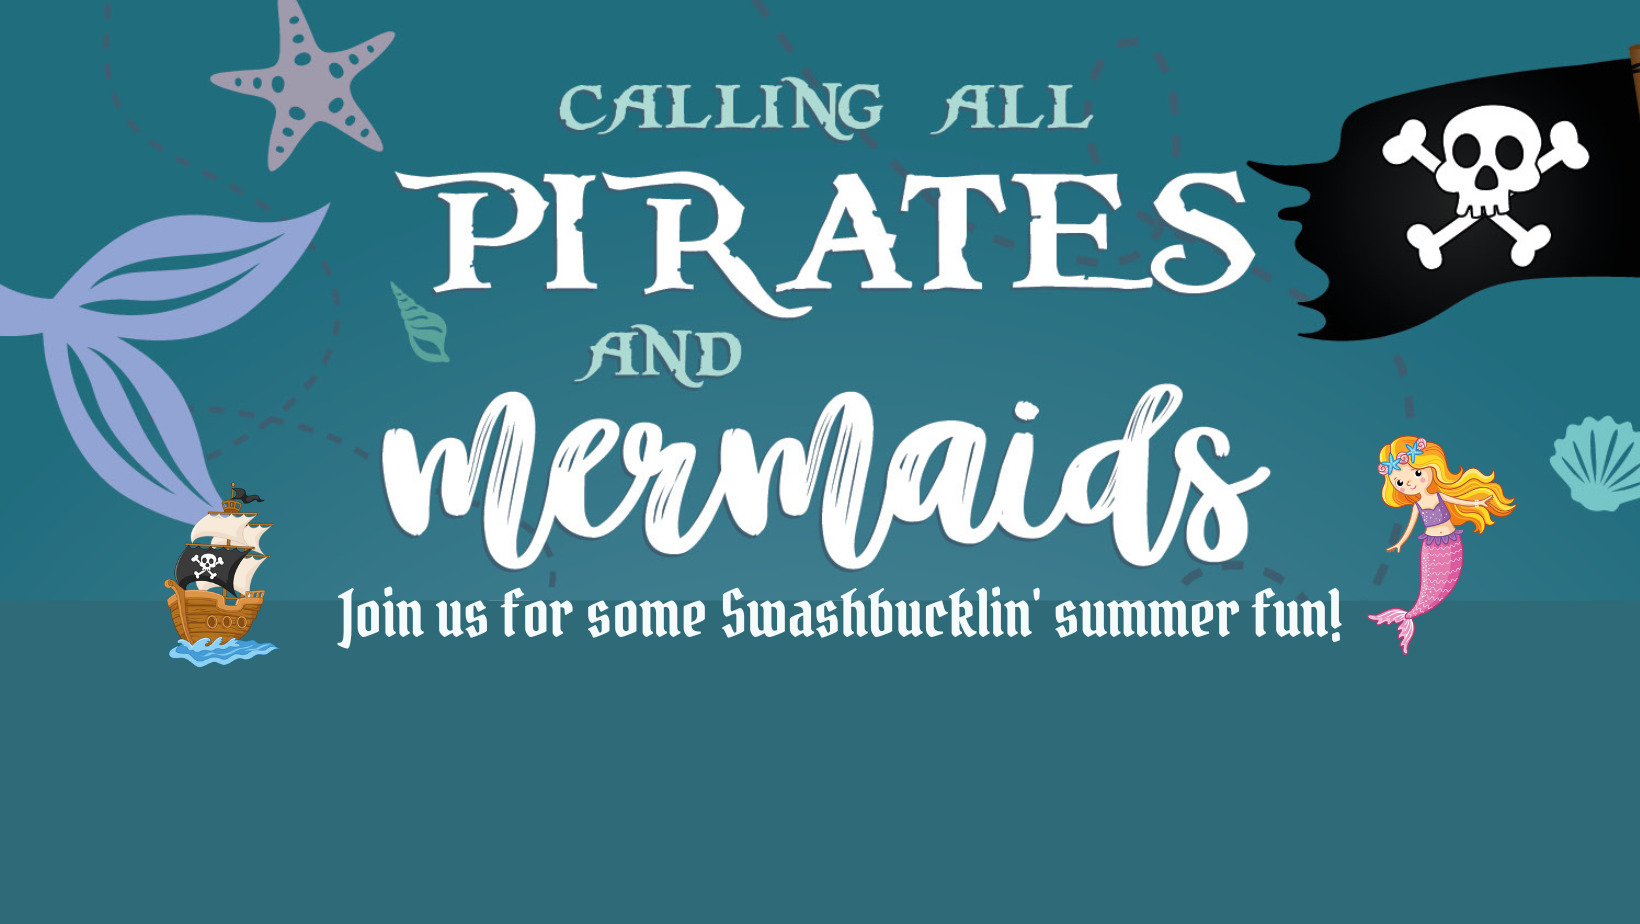 Calling all Pirates and Mermaids!